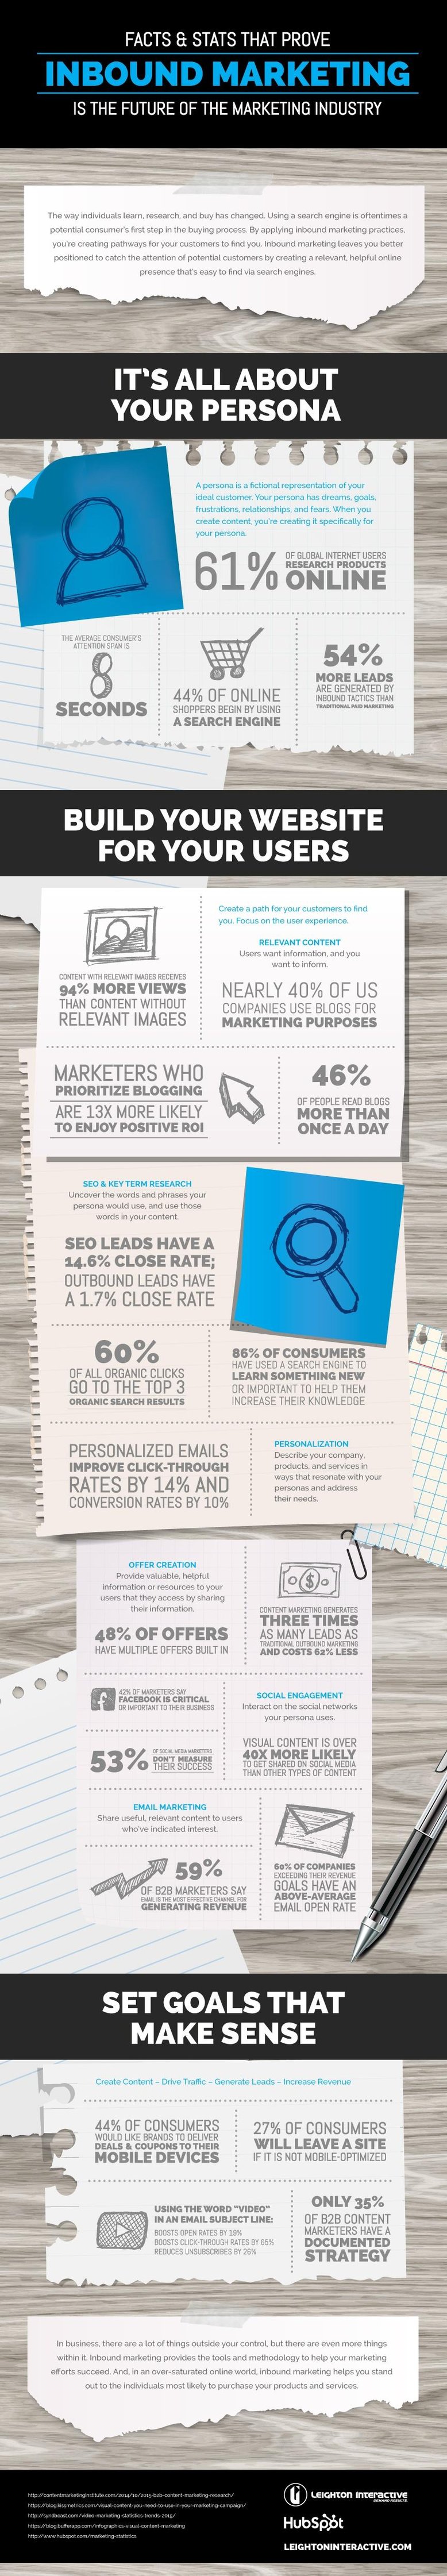 Facts-And-Stats-Inbound-Marketing.jpg